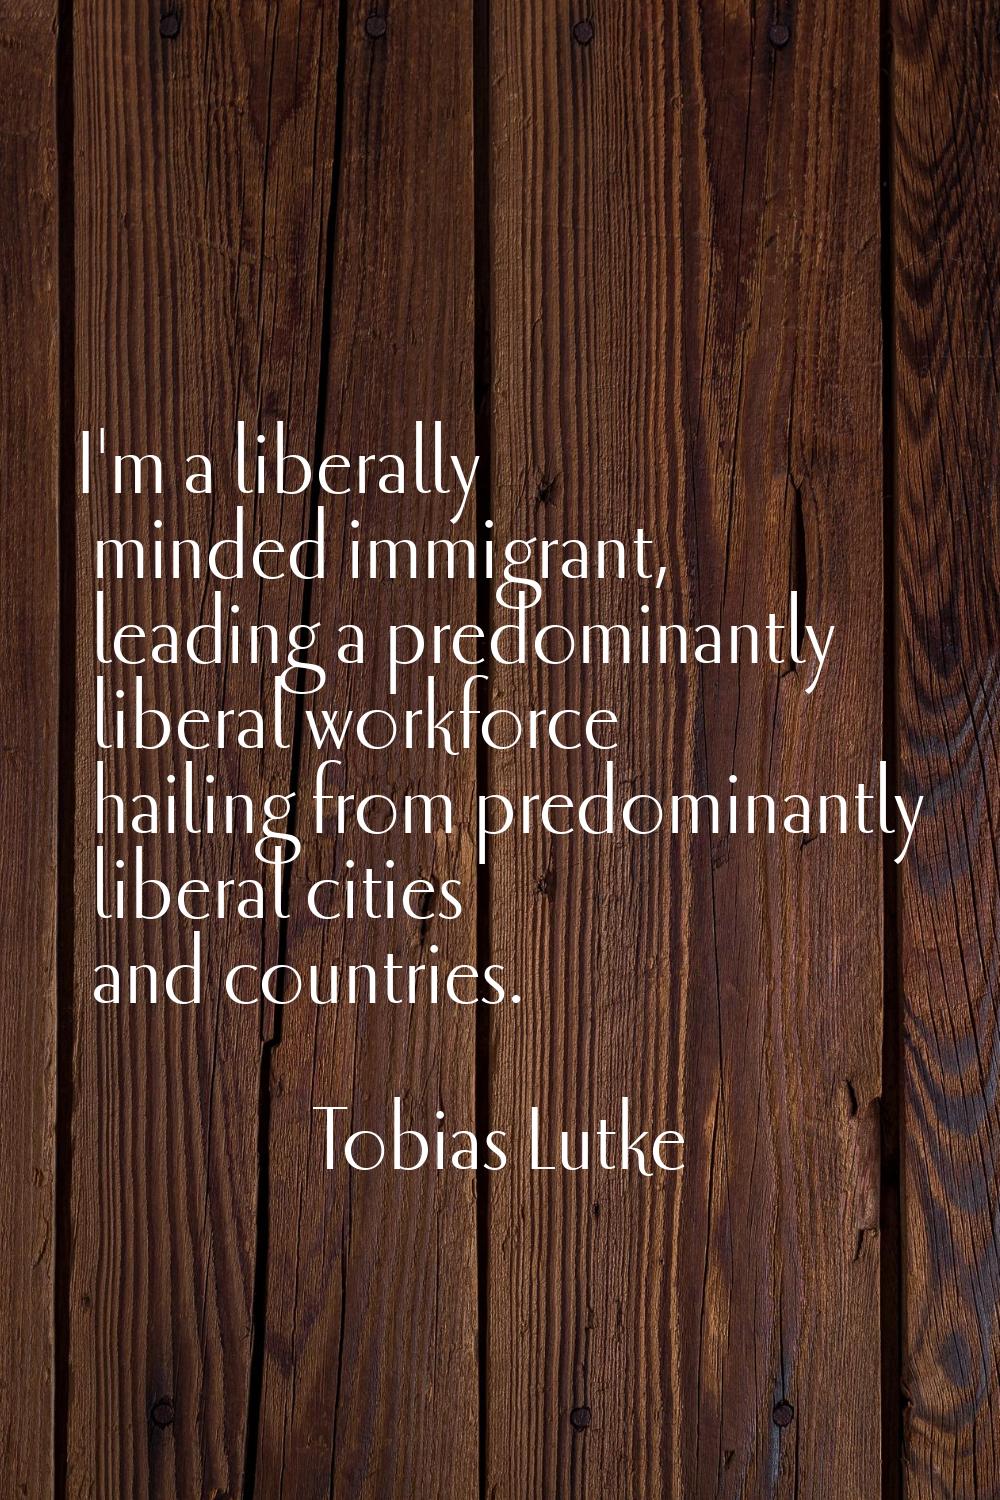 I'm a liberally minded immigrant, leading a predominantly liberal workforce hailing from predominan